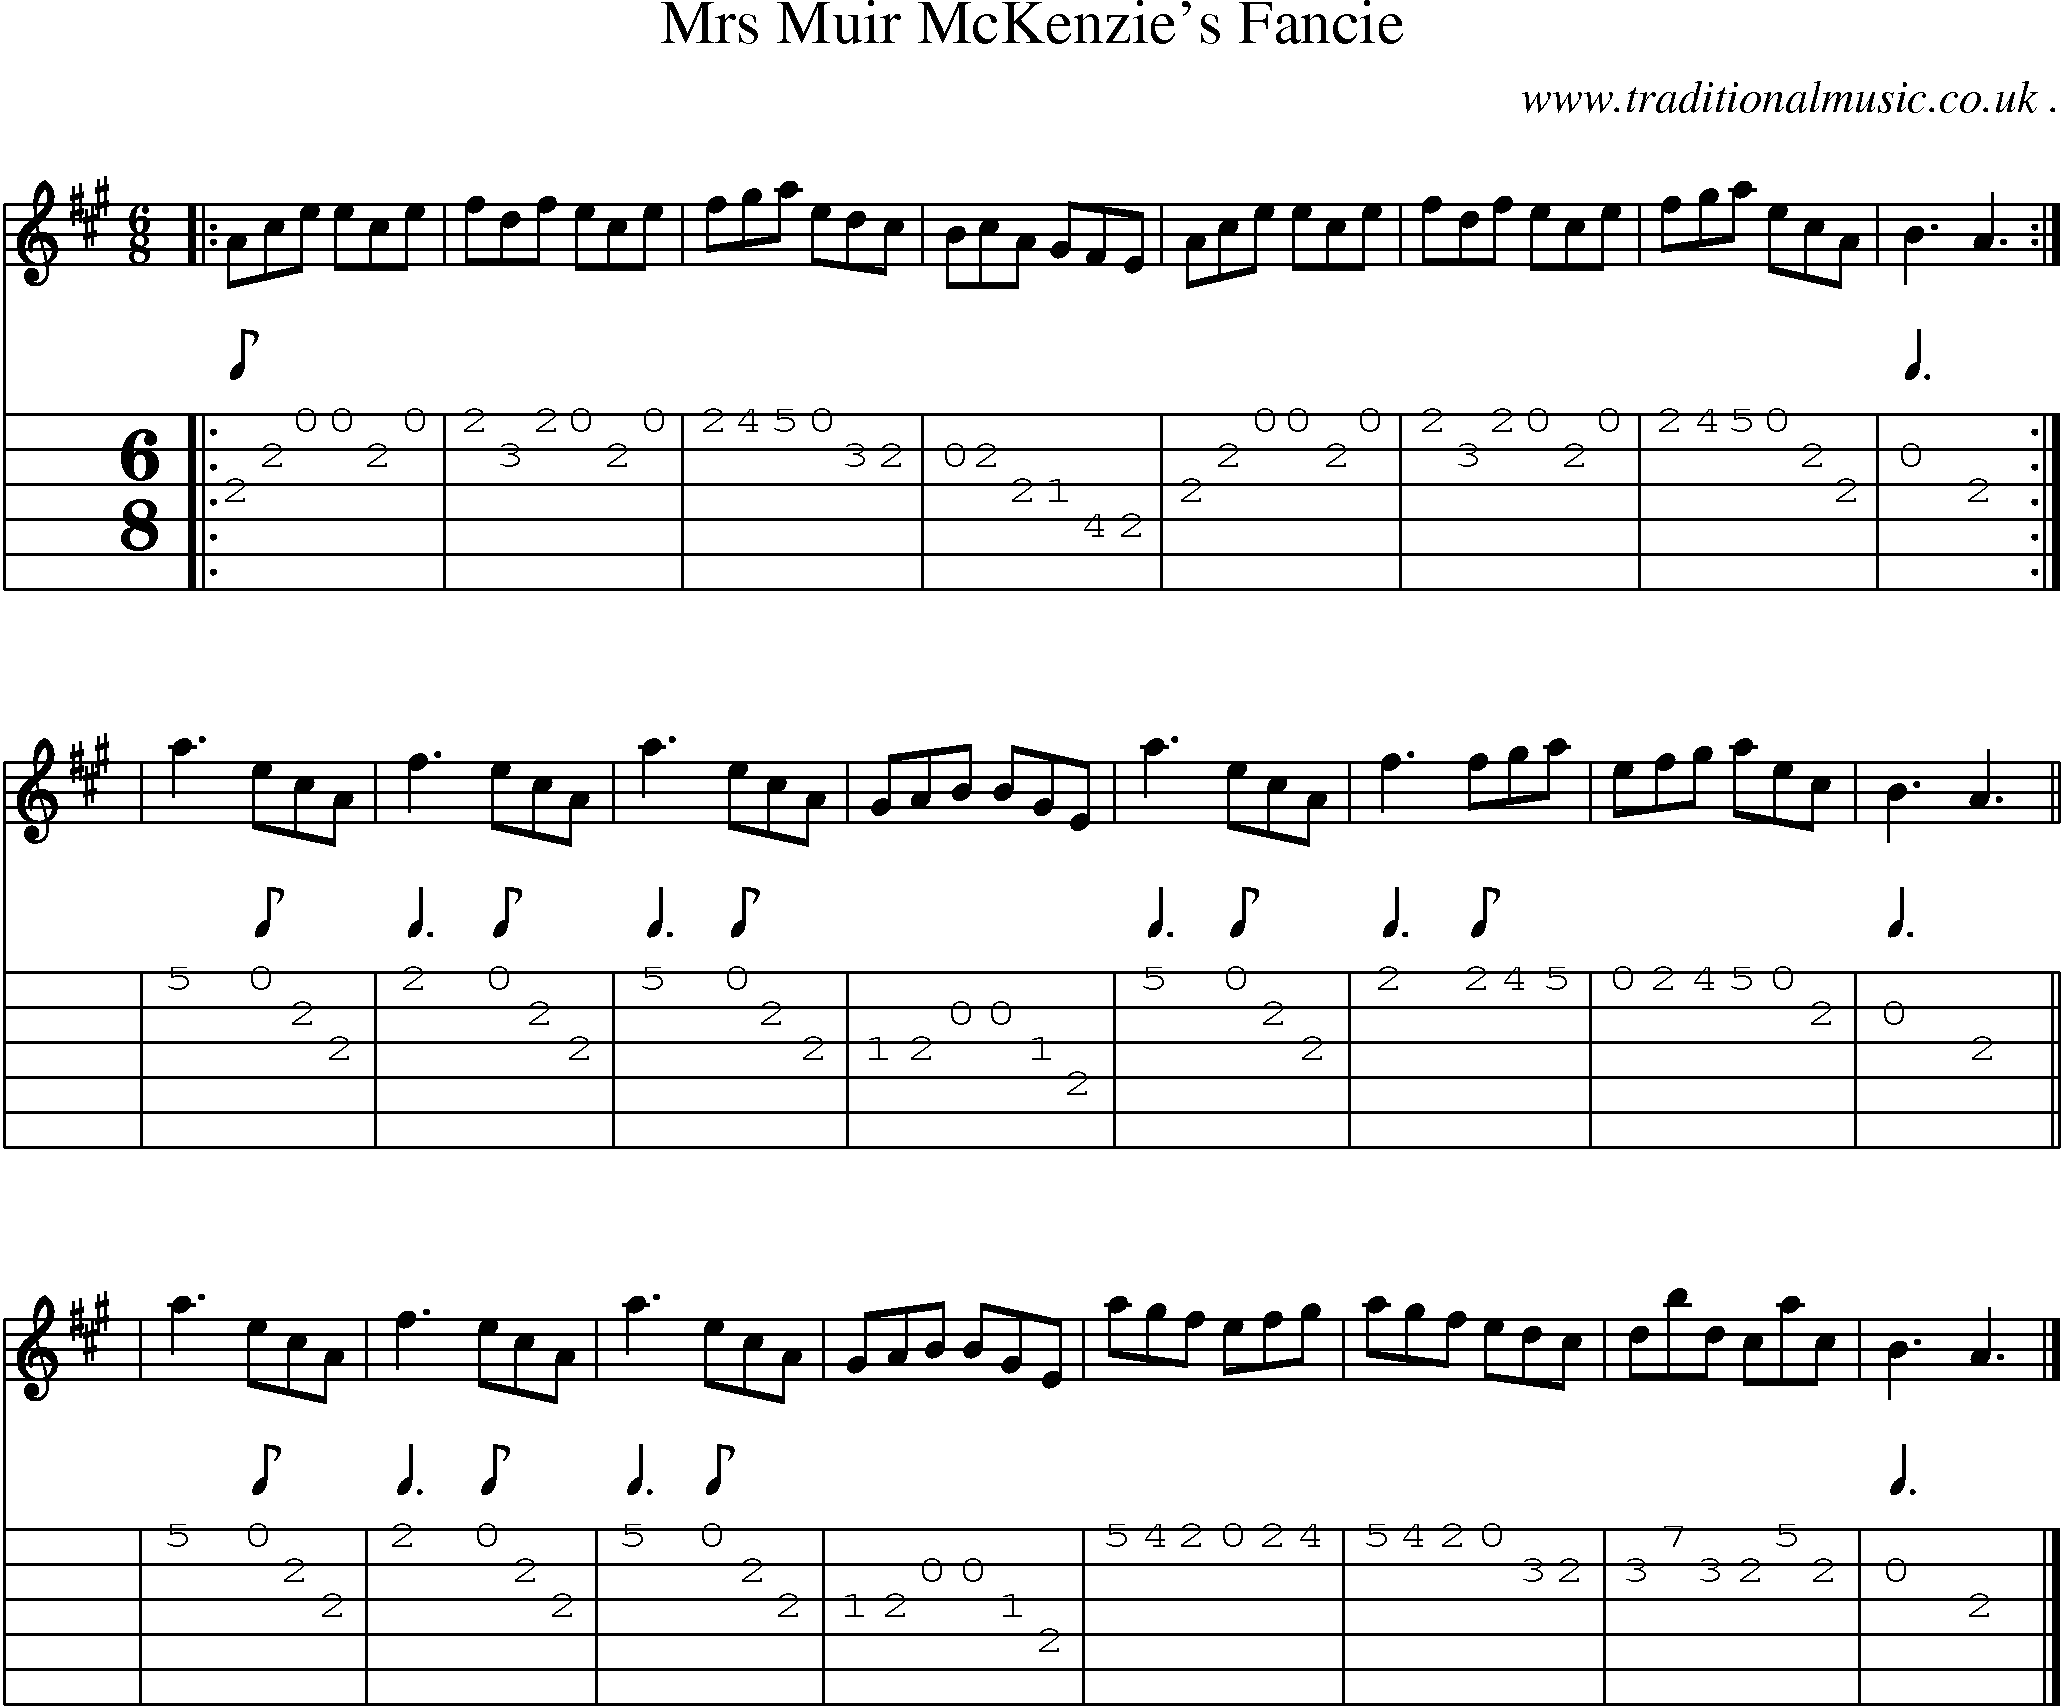 Sheet-music  score, Chords and Guitar Tabs for Mrs Muir Mckenzies Fancie